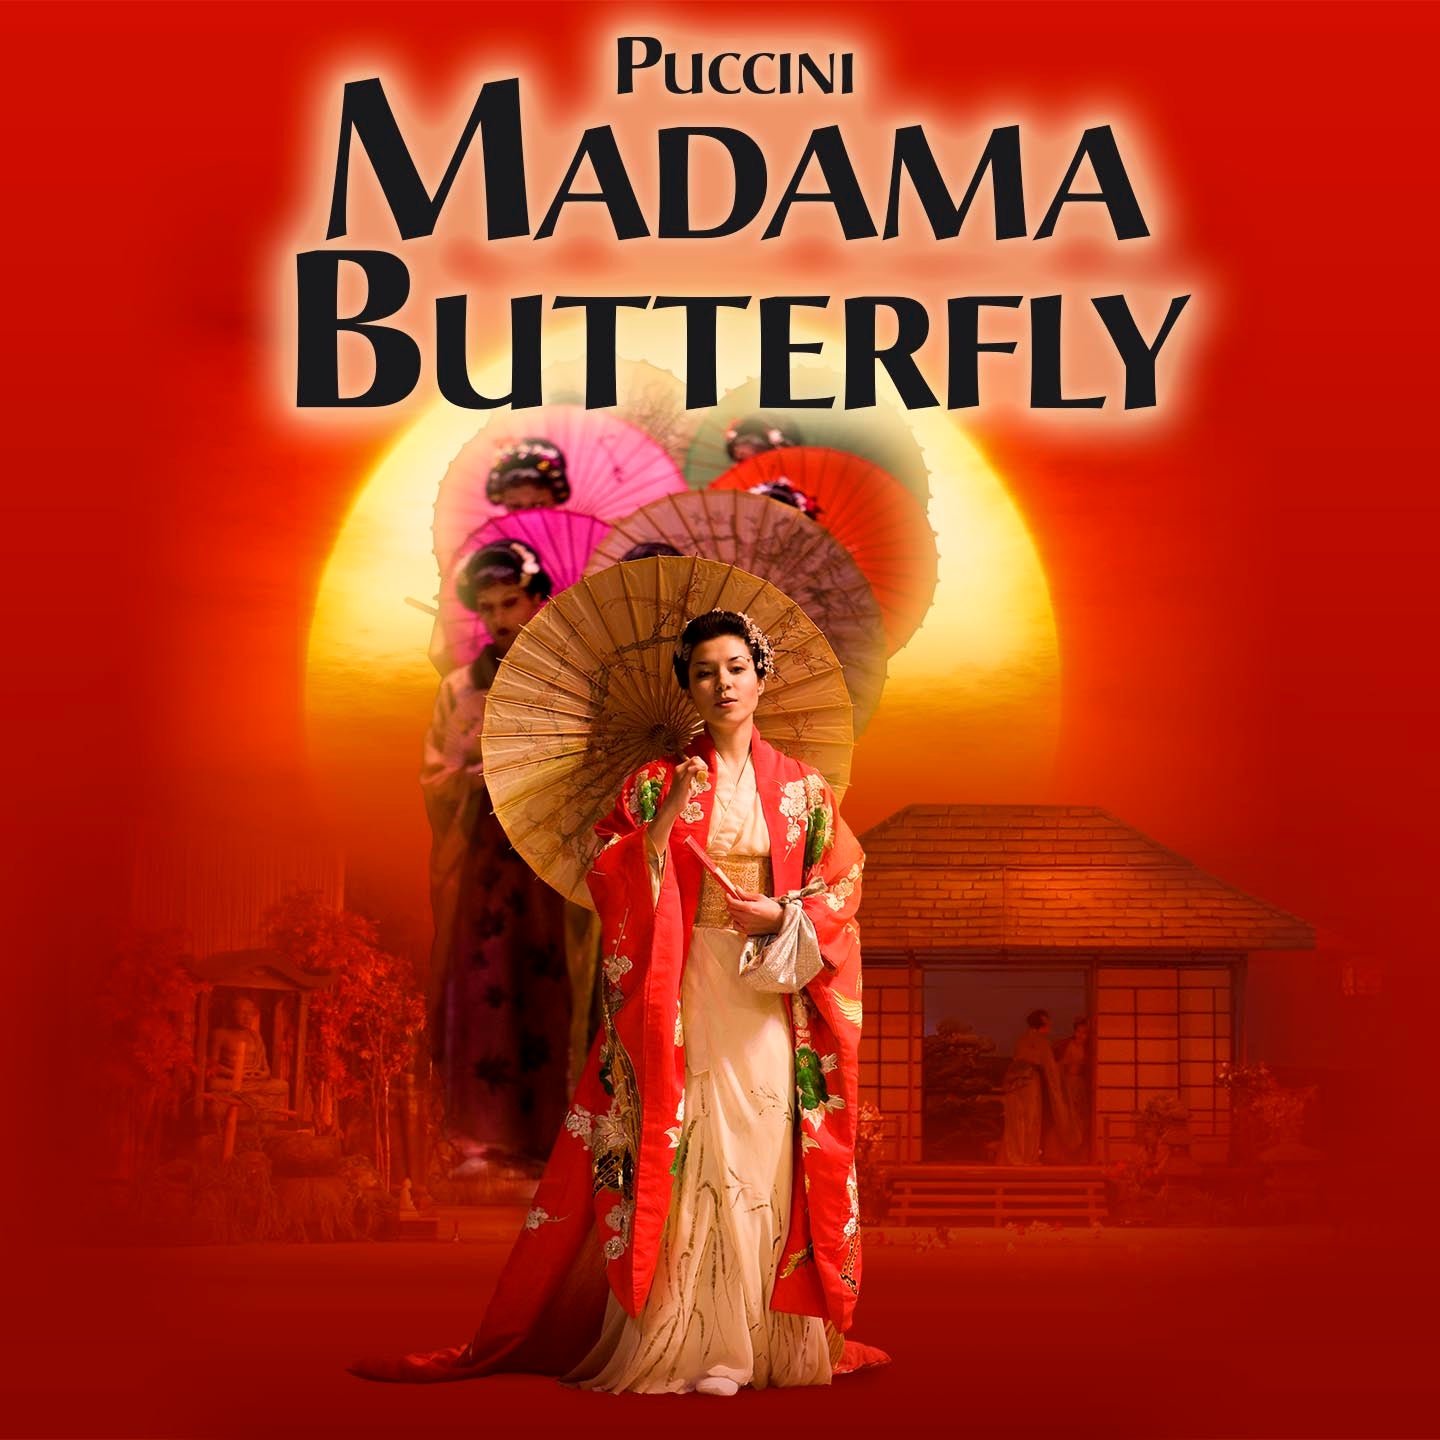 Image name Ellen Kents Madama Butterfly at Hull City Hall Hull the 1 image from the post Ellen Kent's - MADAMA BUTTERFLY at Grand Opera House, York, York in Yorkshire.com.